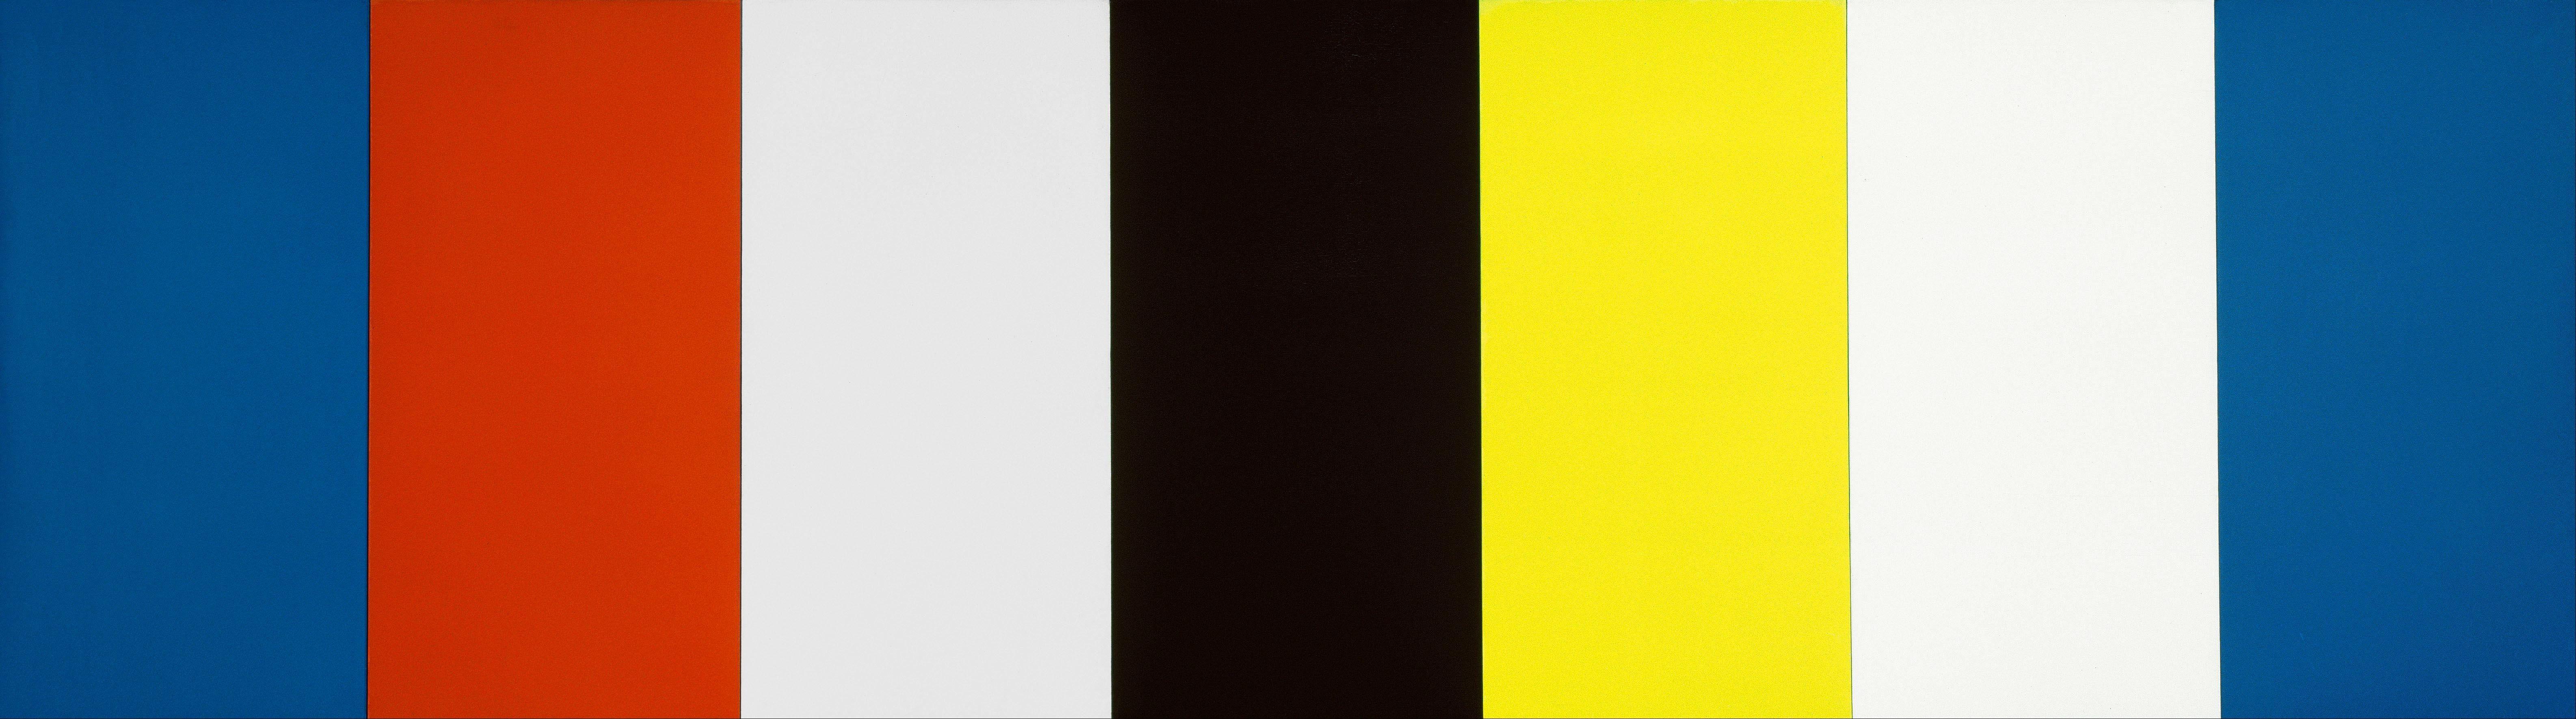 Red Yellow White Logo - File:Ellsworth Kelly - Red Yellow Blue White and Black - Google Art ...